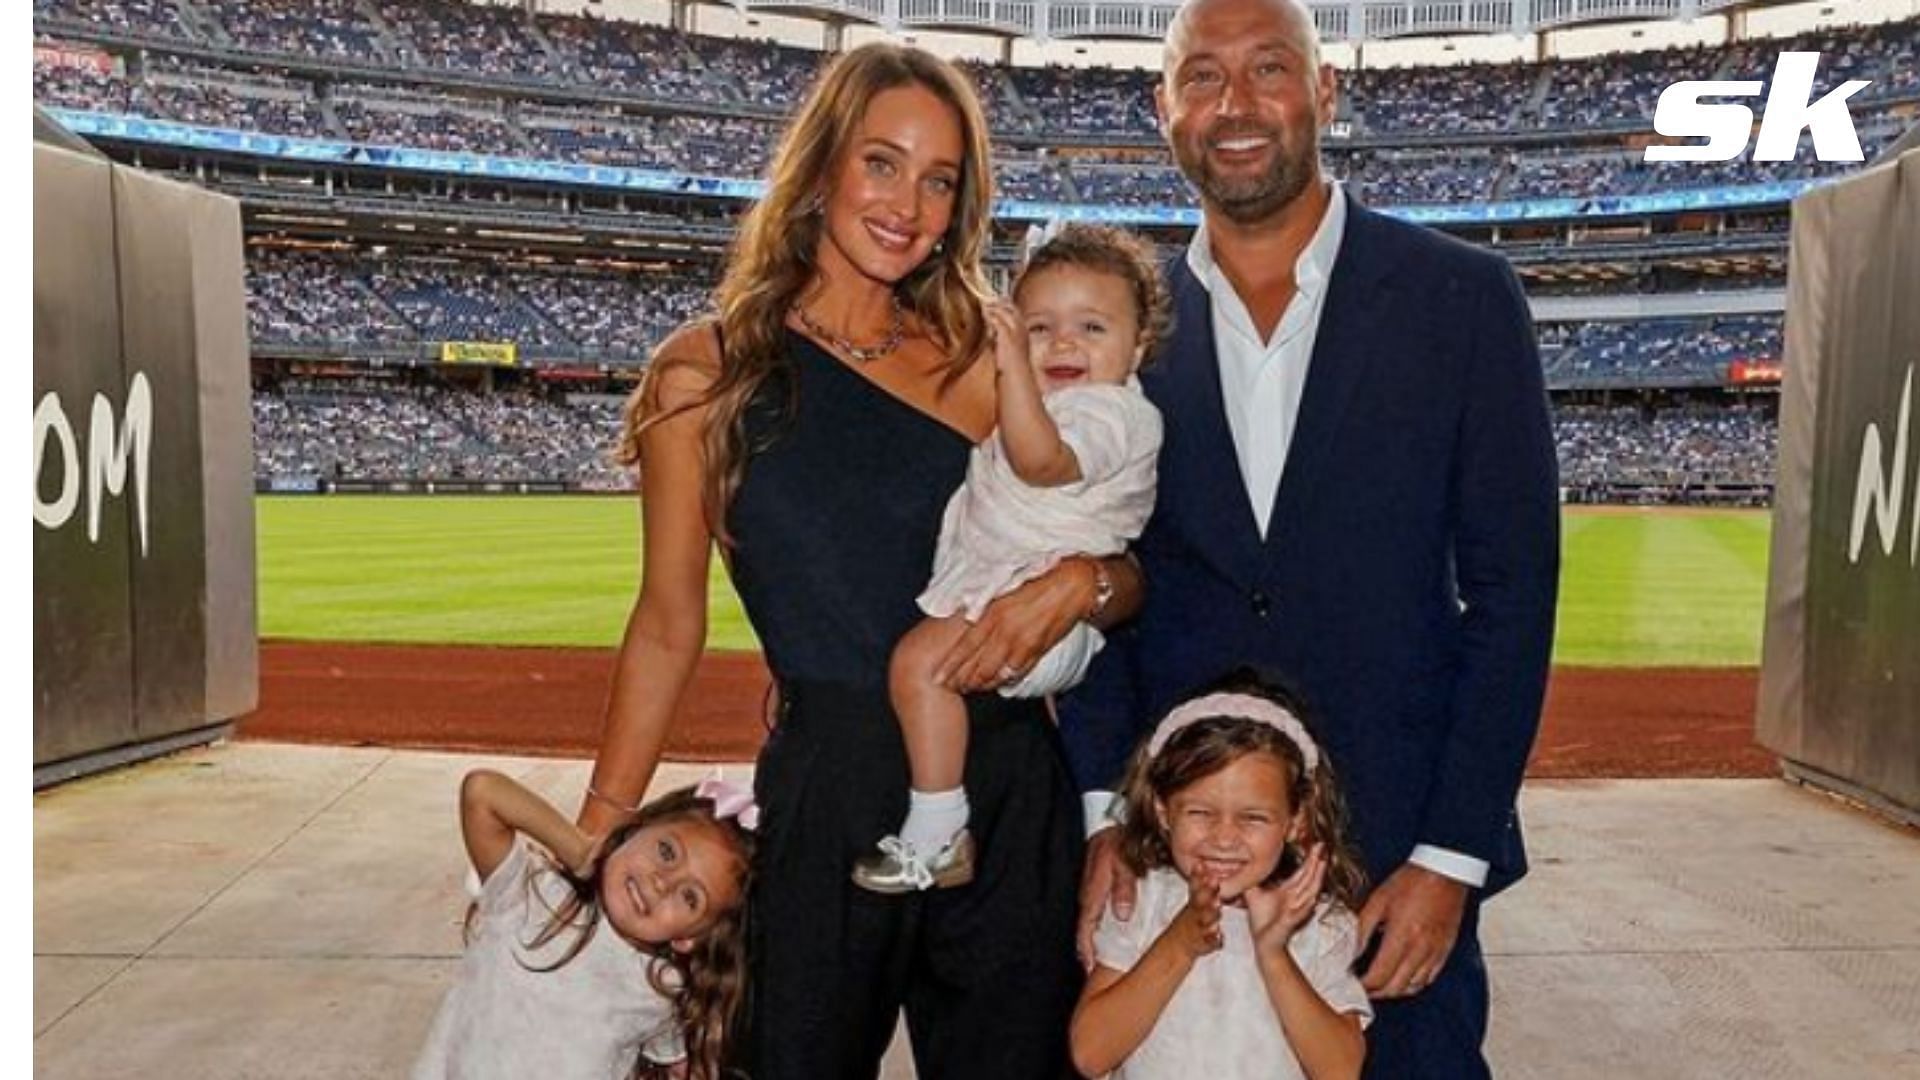 Who knows when it's gonna be? But I look forward to it - New York Yankees  legend Derek Jeter once opened up about starting his own family just days  before his last